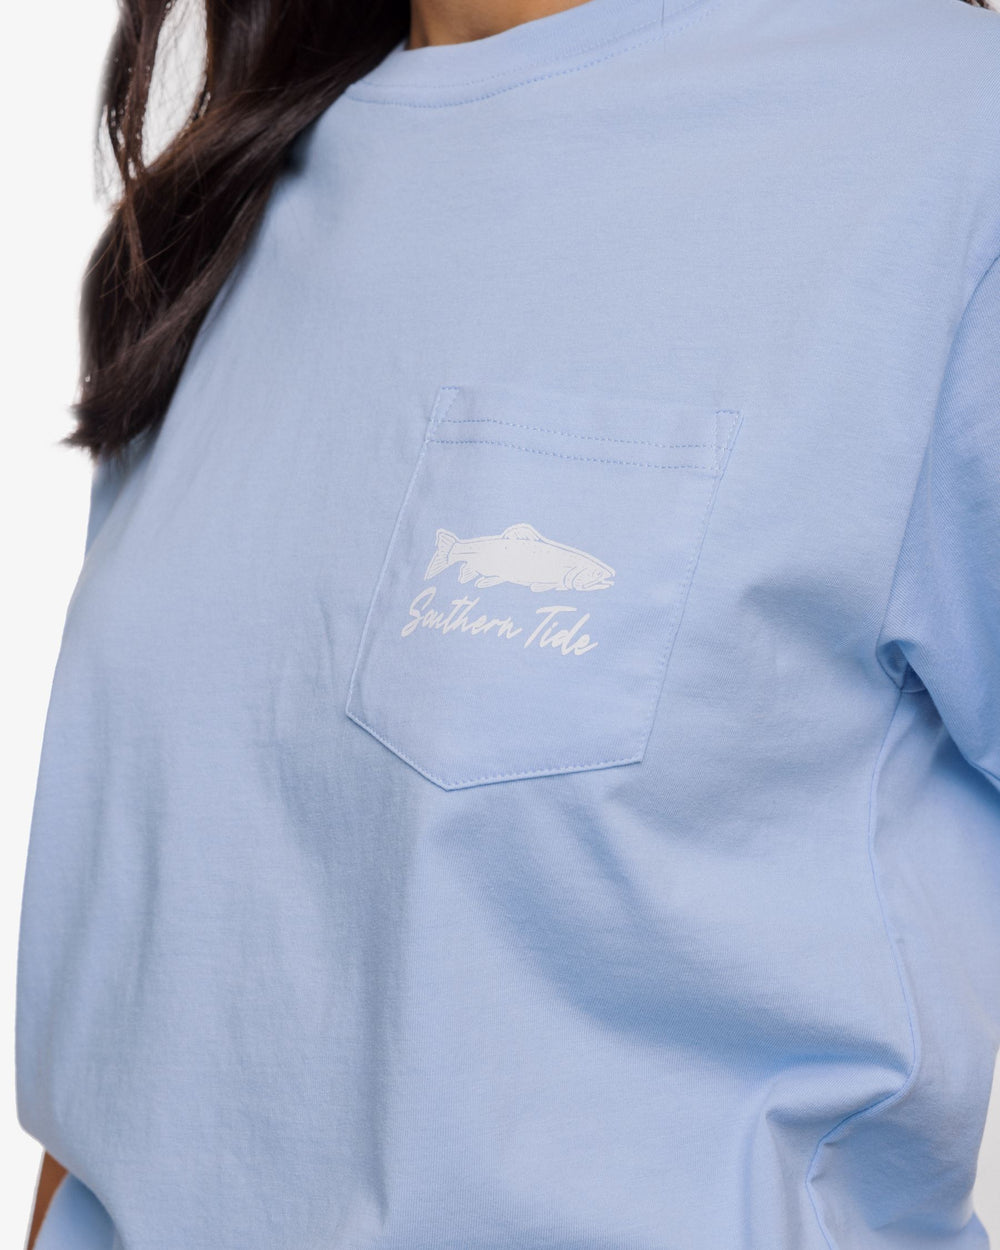 The detail view of the Southern Tide Dotted Trout T-shirt by Southern Tide - Sky Blue